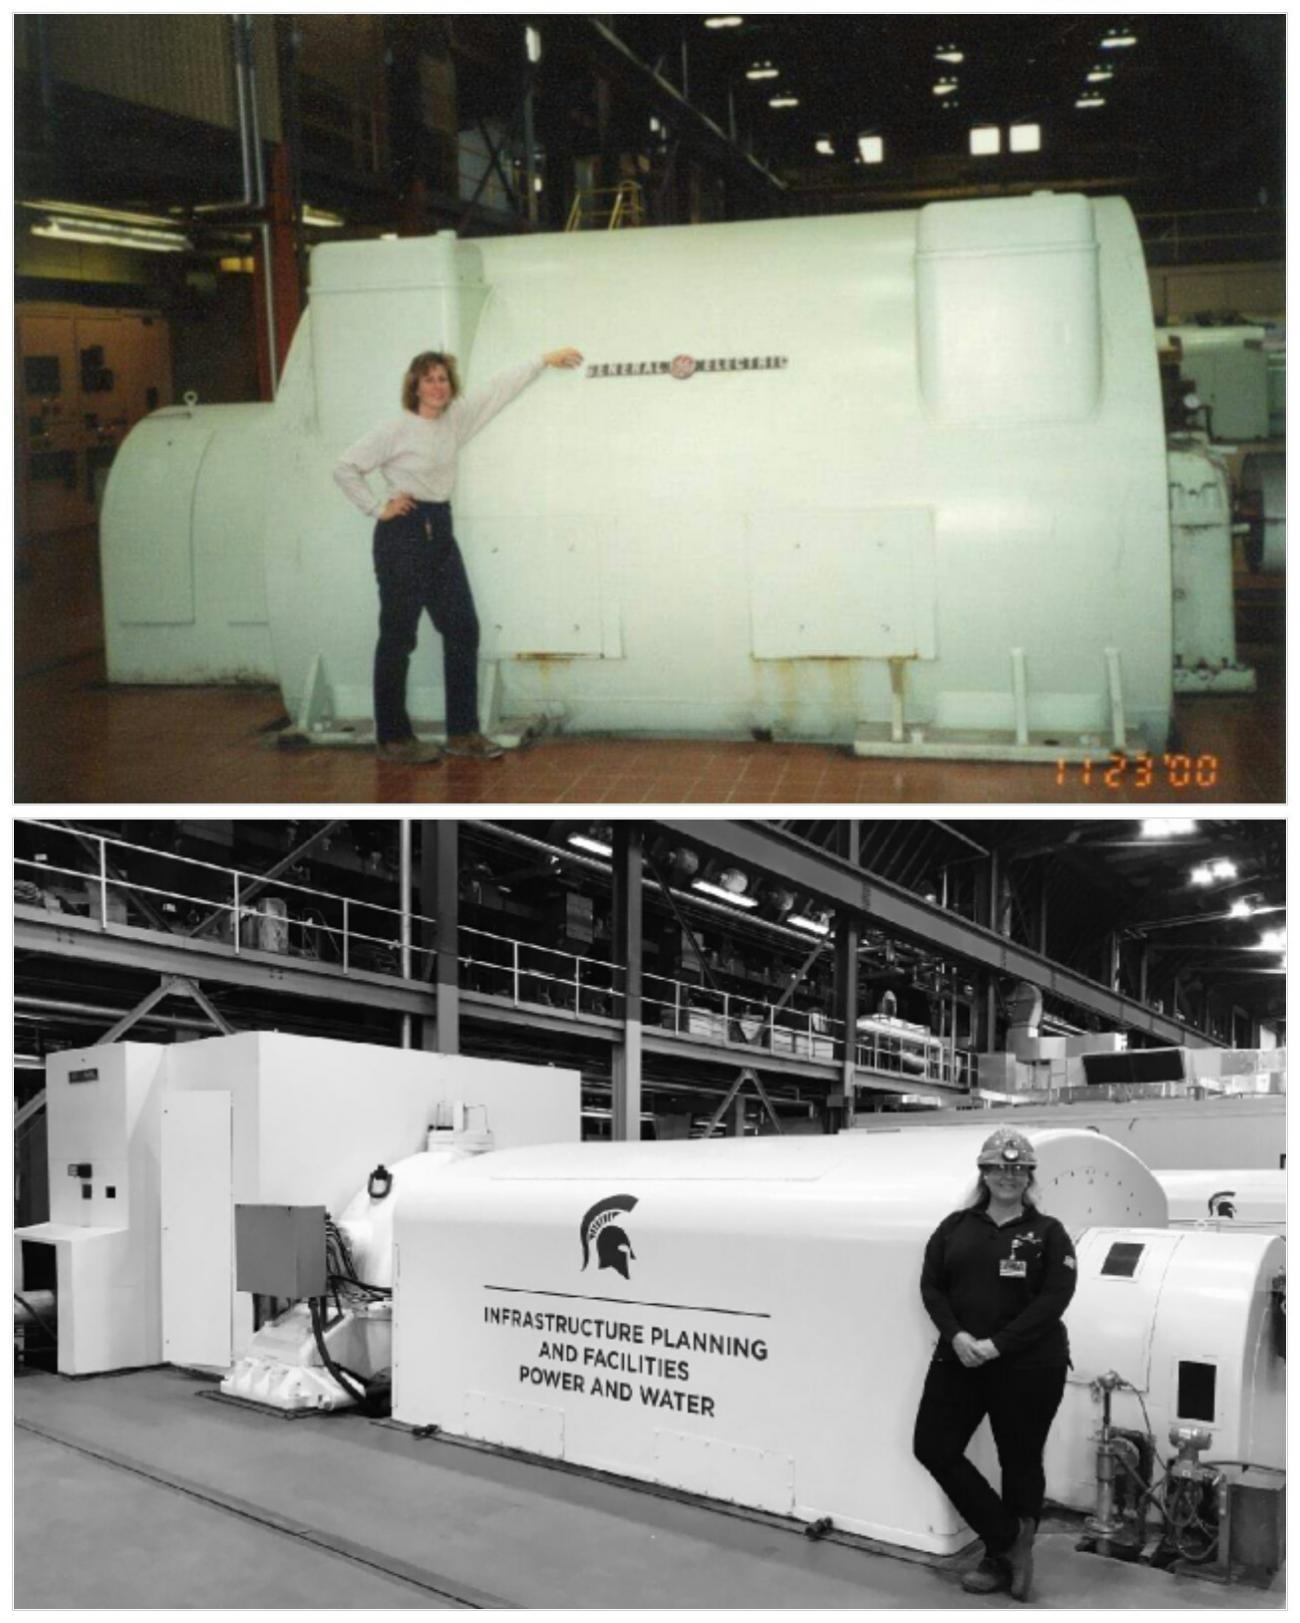 Two photos of a smiling white woman in front of a large steam turbine; the top photo is older with a burned-in timestamp.